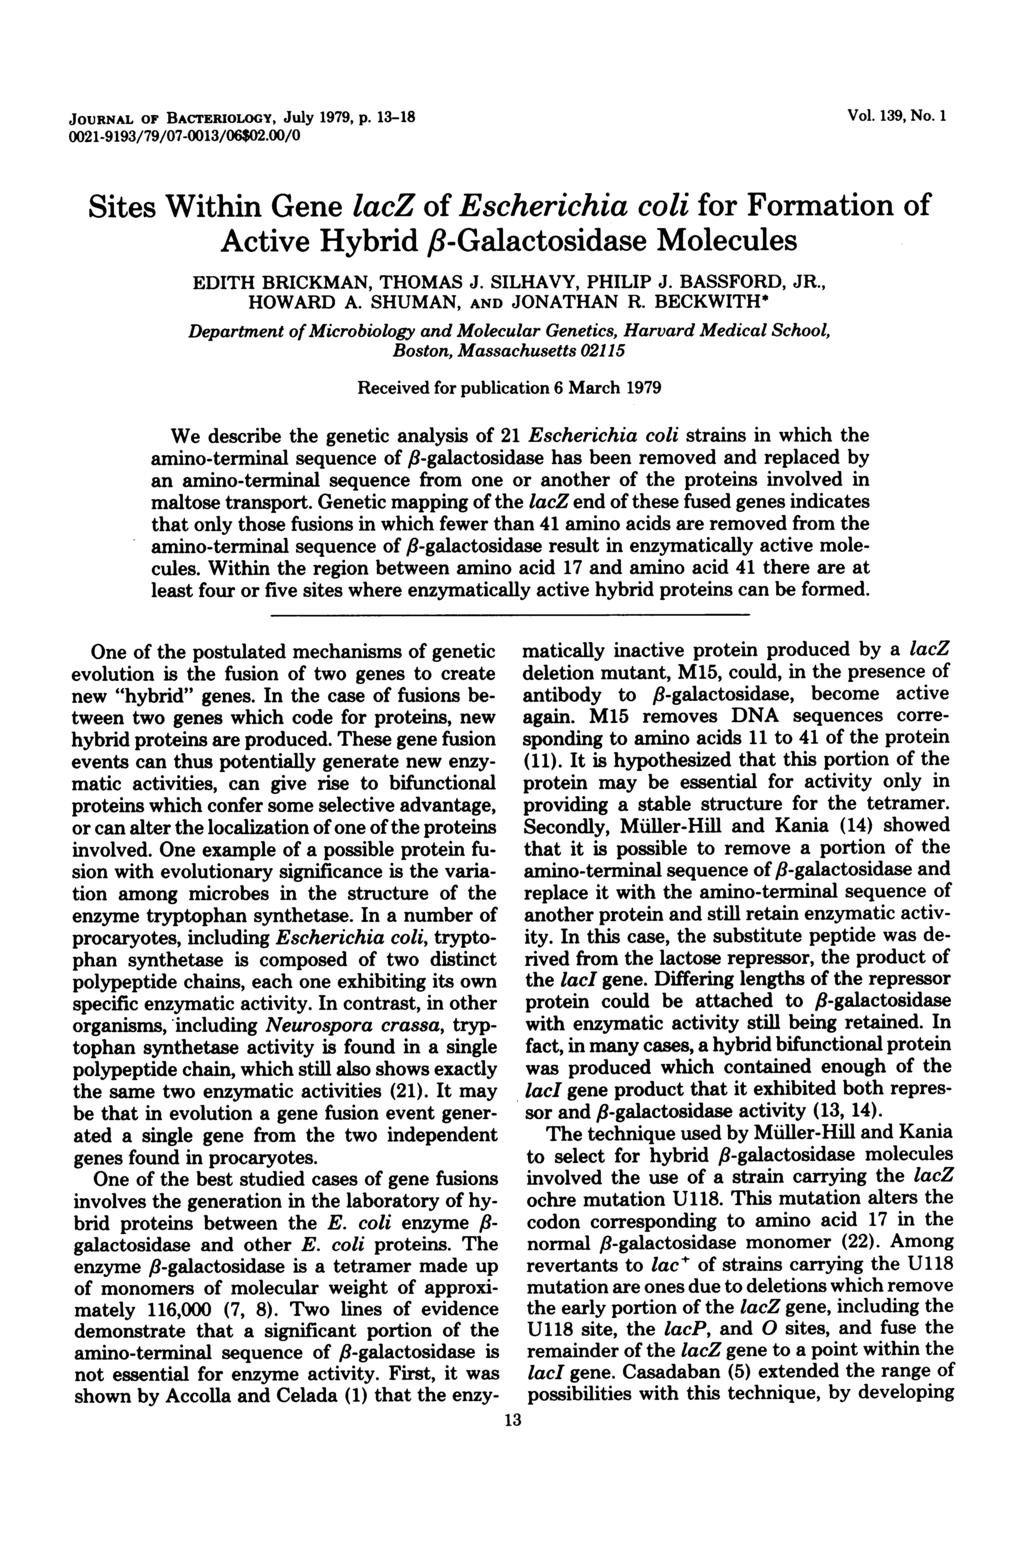 JOURNAL OF BACTERIOLOGY, July 1979, p. 13-18 Vol. 139, No. 1 0021-9193/79/07-0013/06$02.00/0 Sites Within Gene lacz of Escherichia coli for Formation of Active Hybrid f?